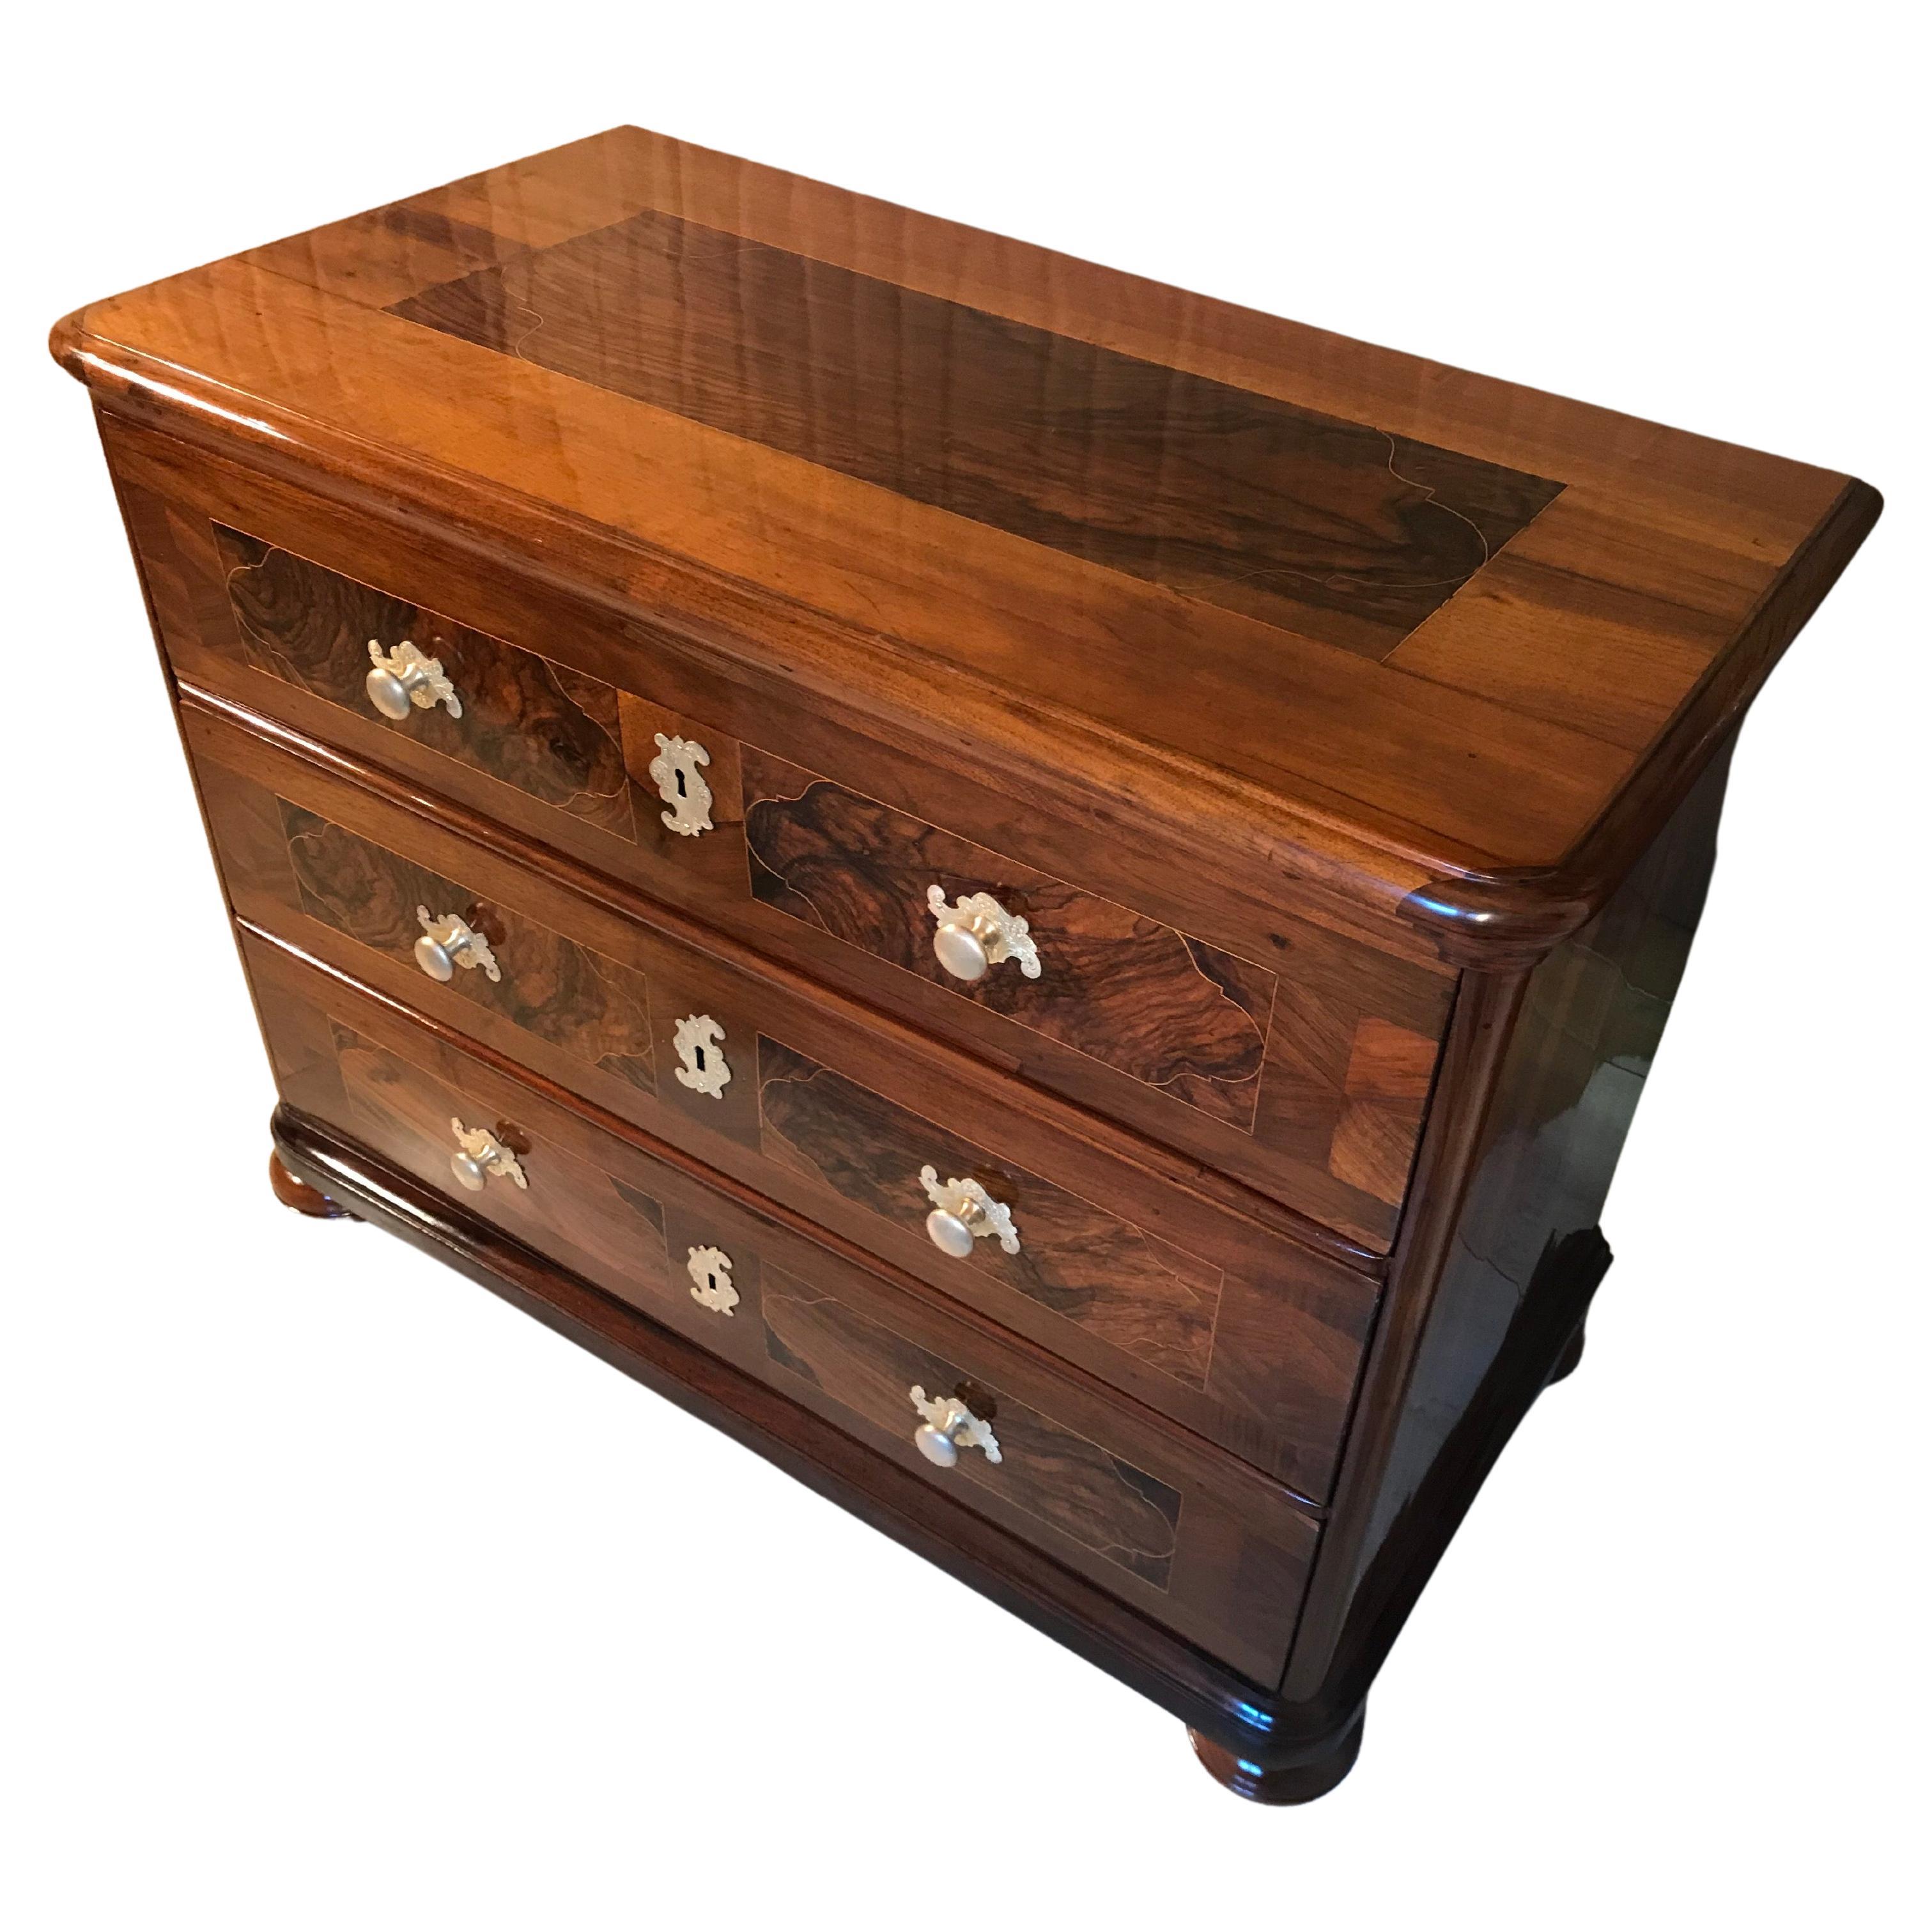 Discover an exquisite 18th-century Baroque chest from Southern Germany. This pretty piece of furniture showcases the timeless beauty of the era. Crafted with precision, the chest features three spacious drawers and is resting elegantly on bun feet.